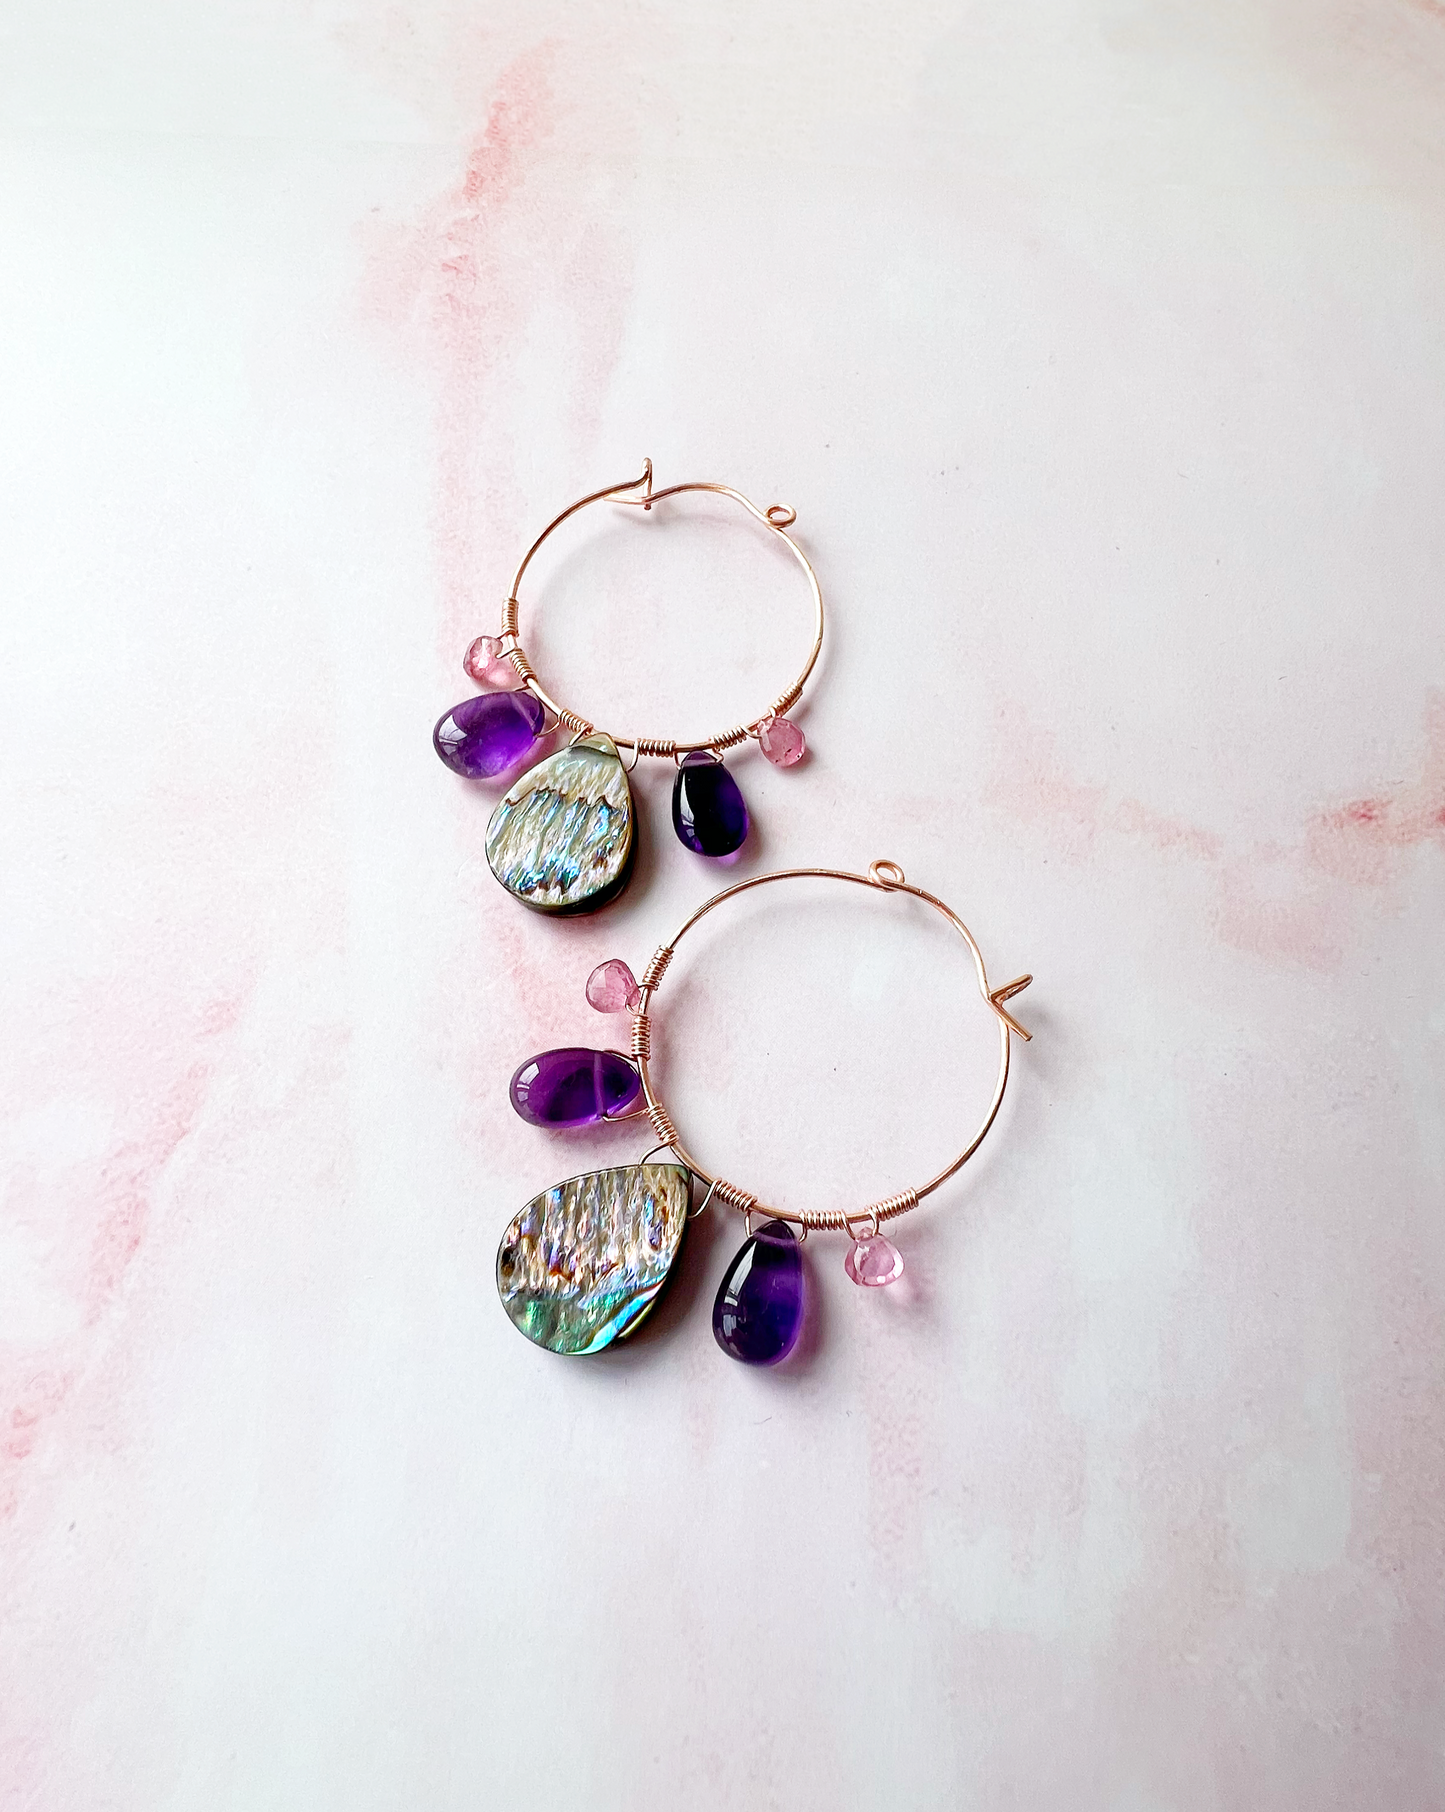 Peacock feather earrings with abalone, amethyst and pink tourmaline